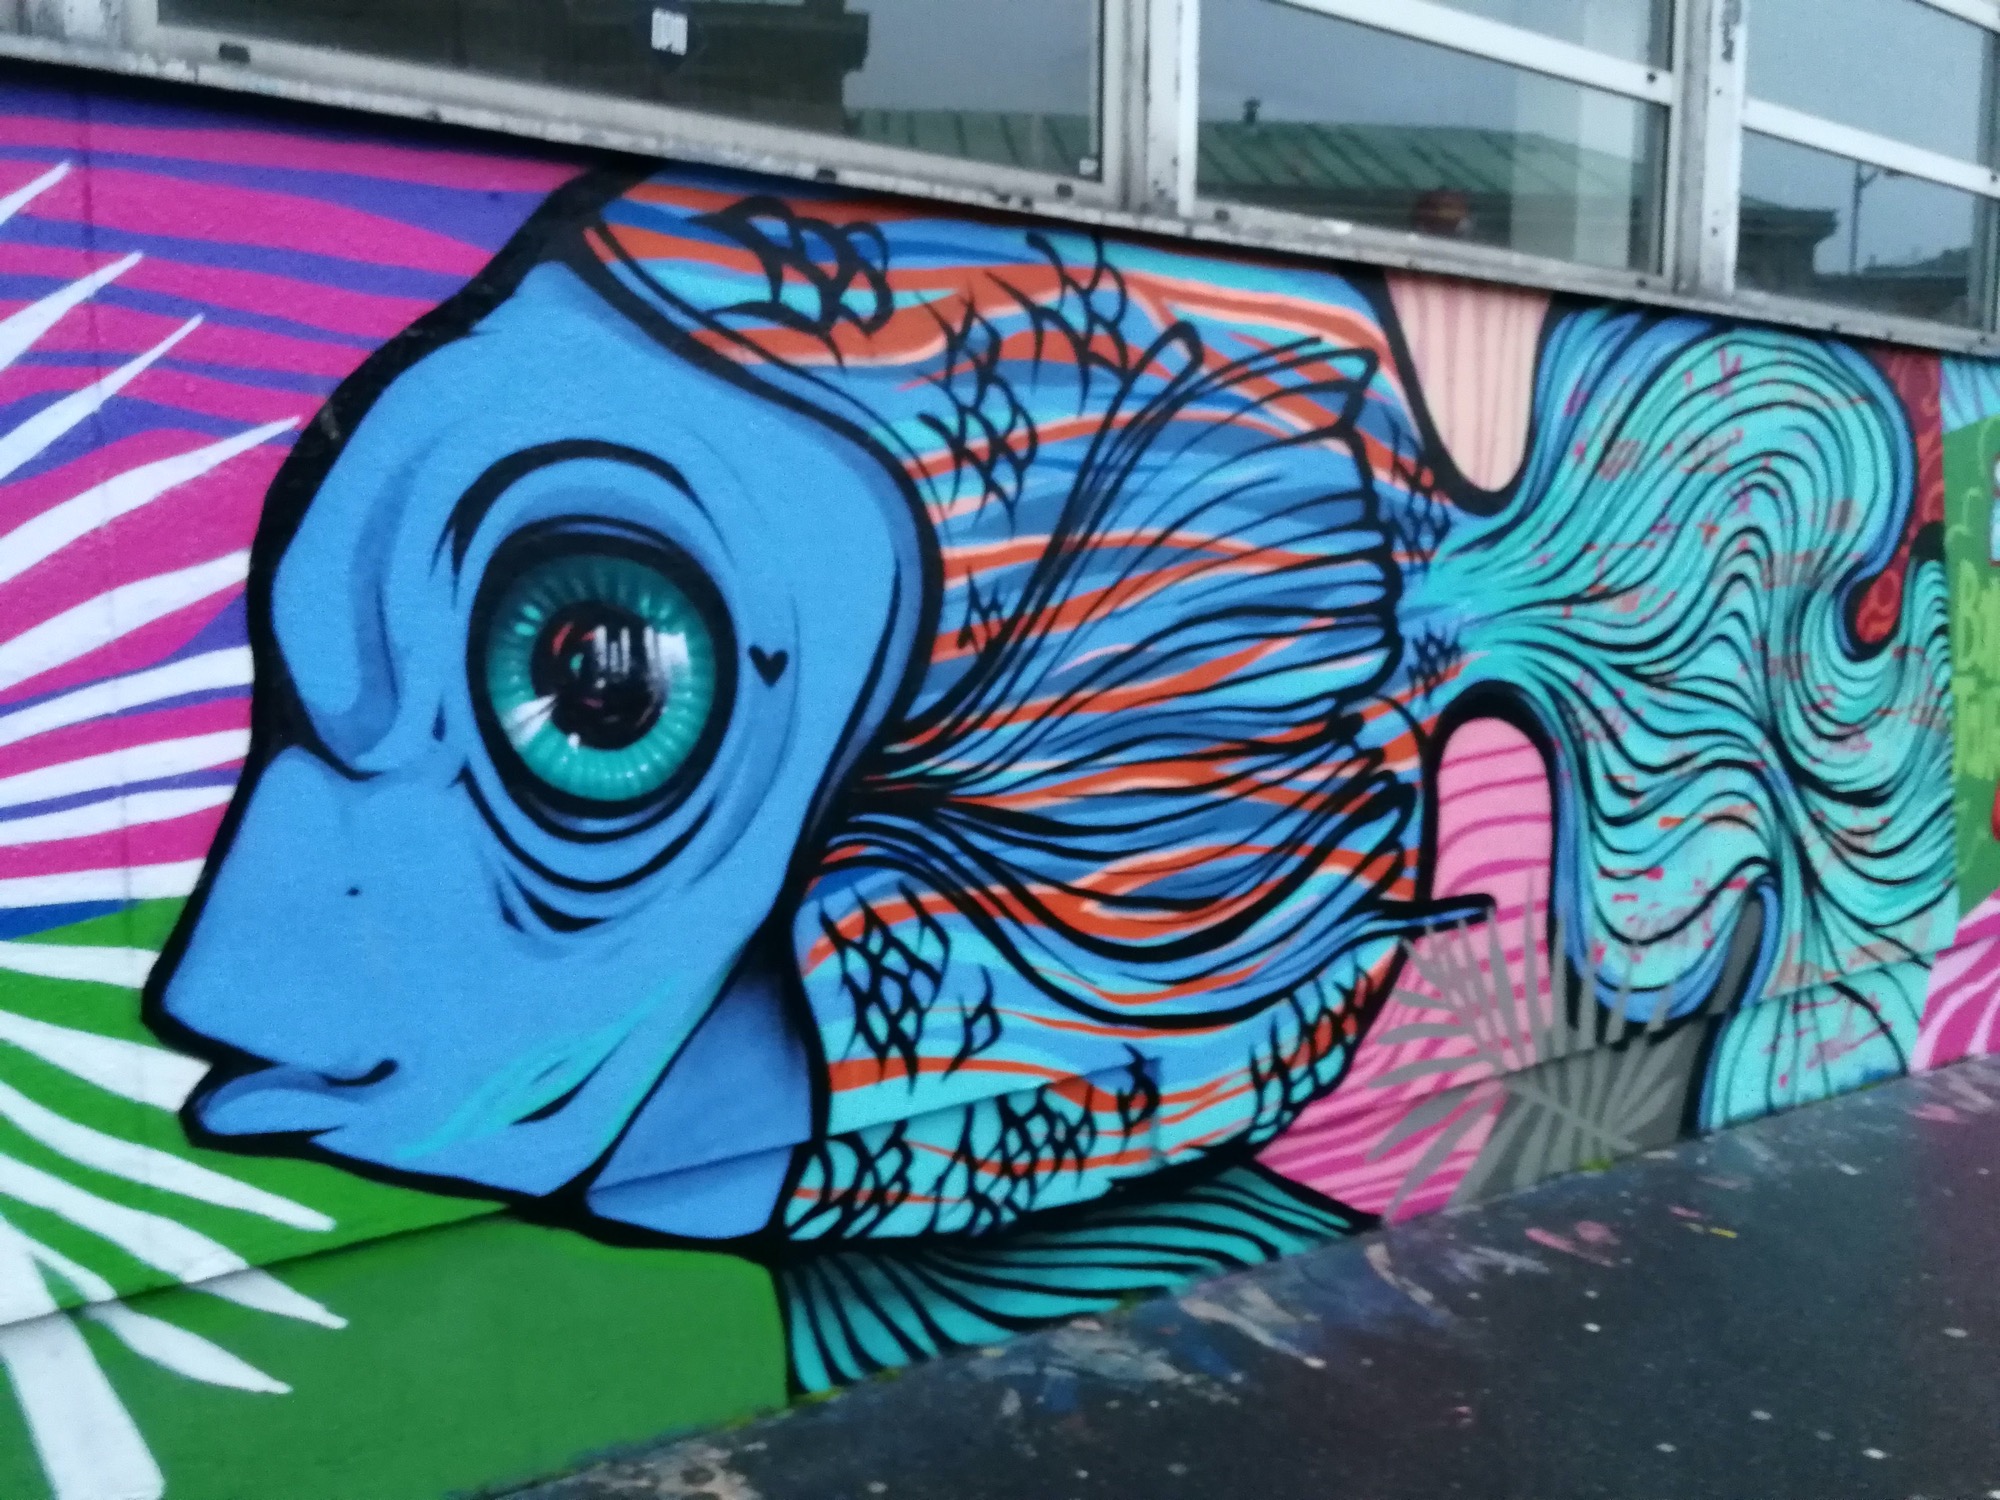 Graffiti 673  by the artist Toys Daniel captured by Rabot in Paris France